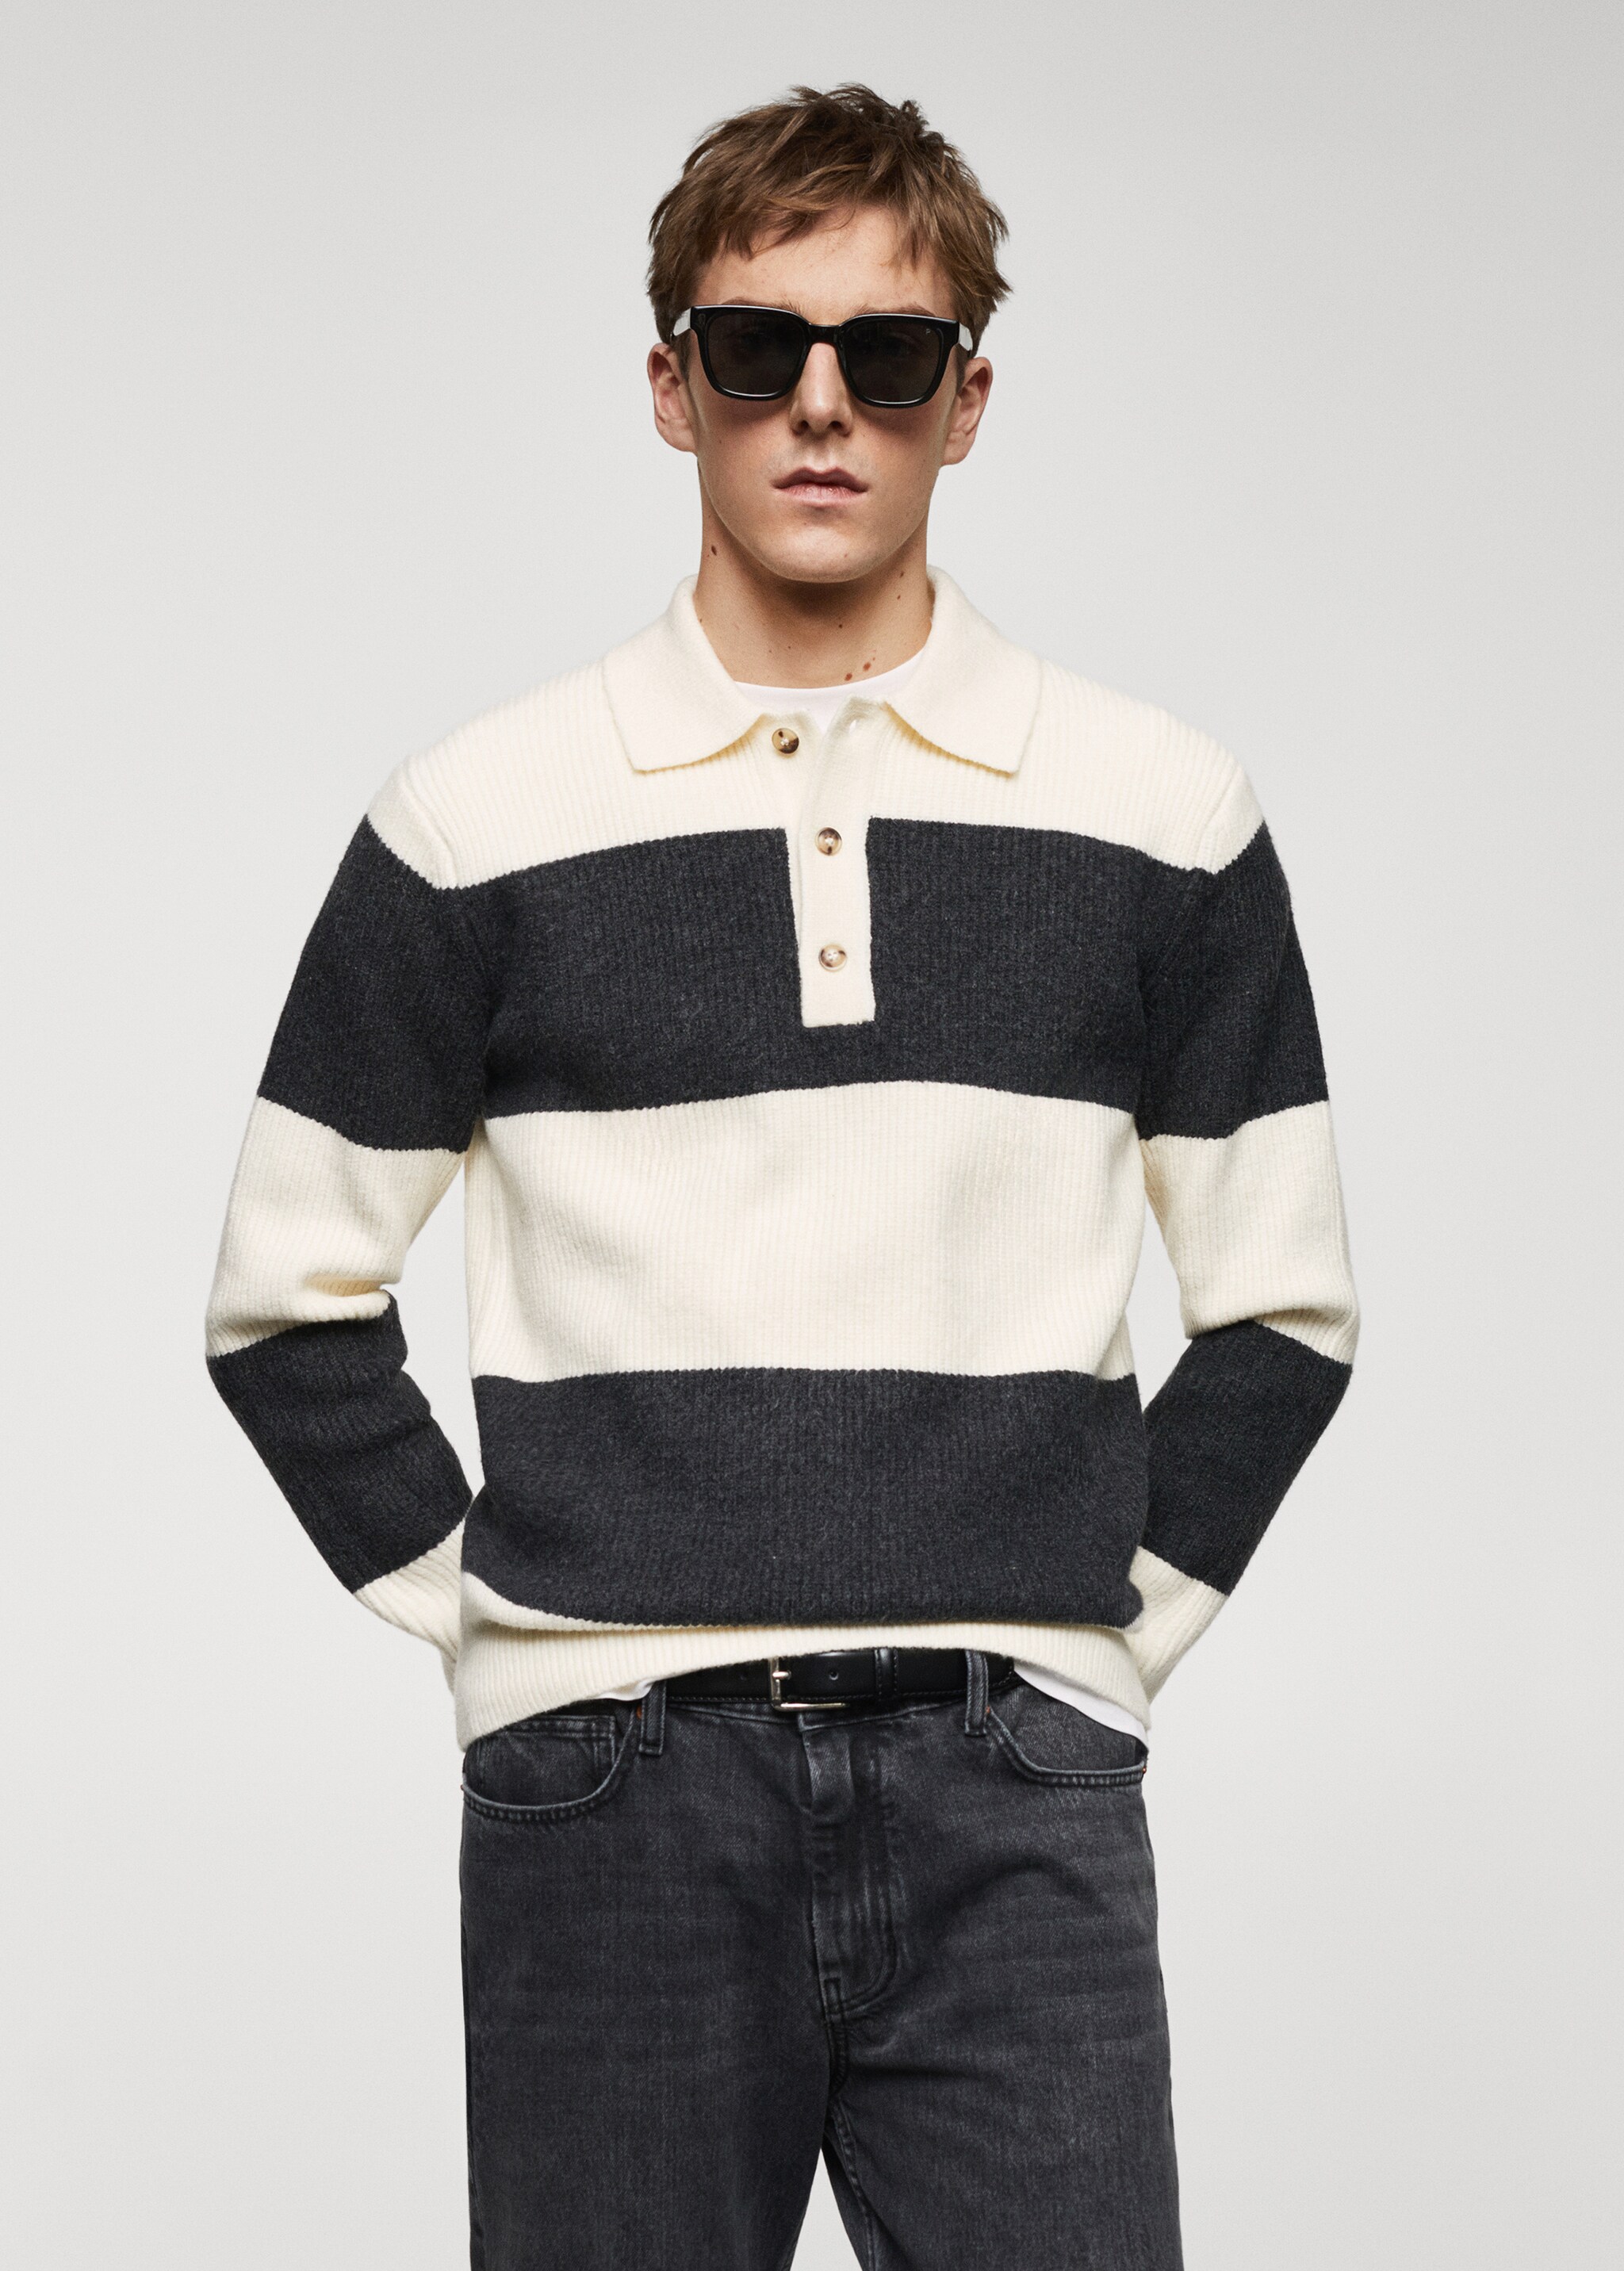 Ribbed striped knitted polo shirt - Medium plane